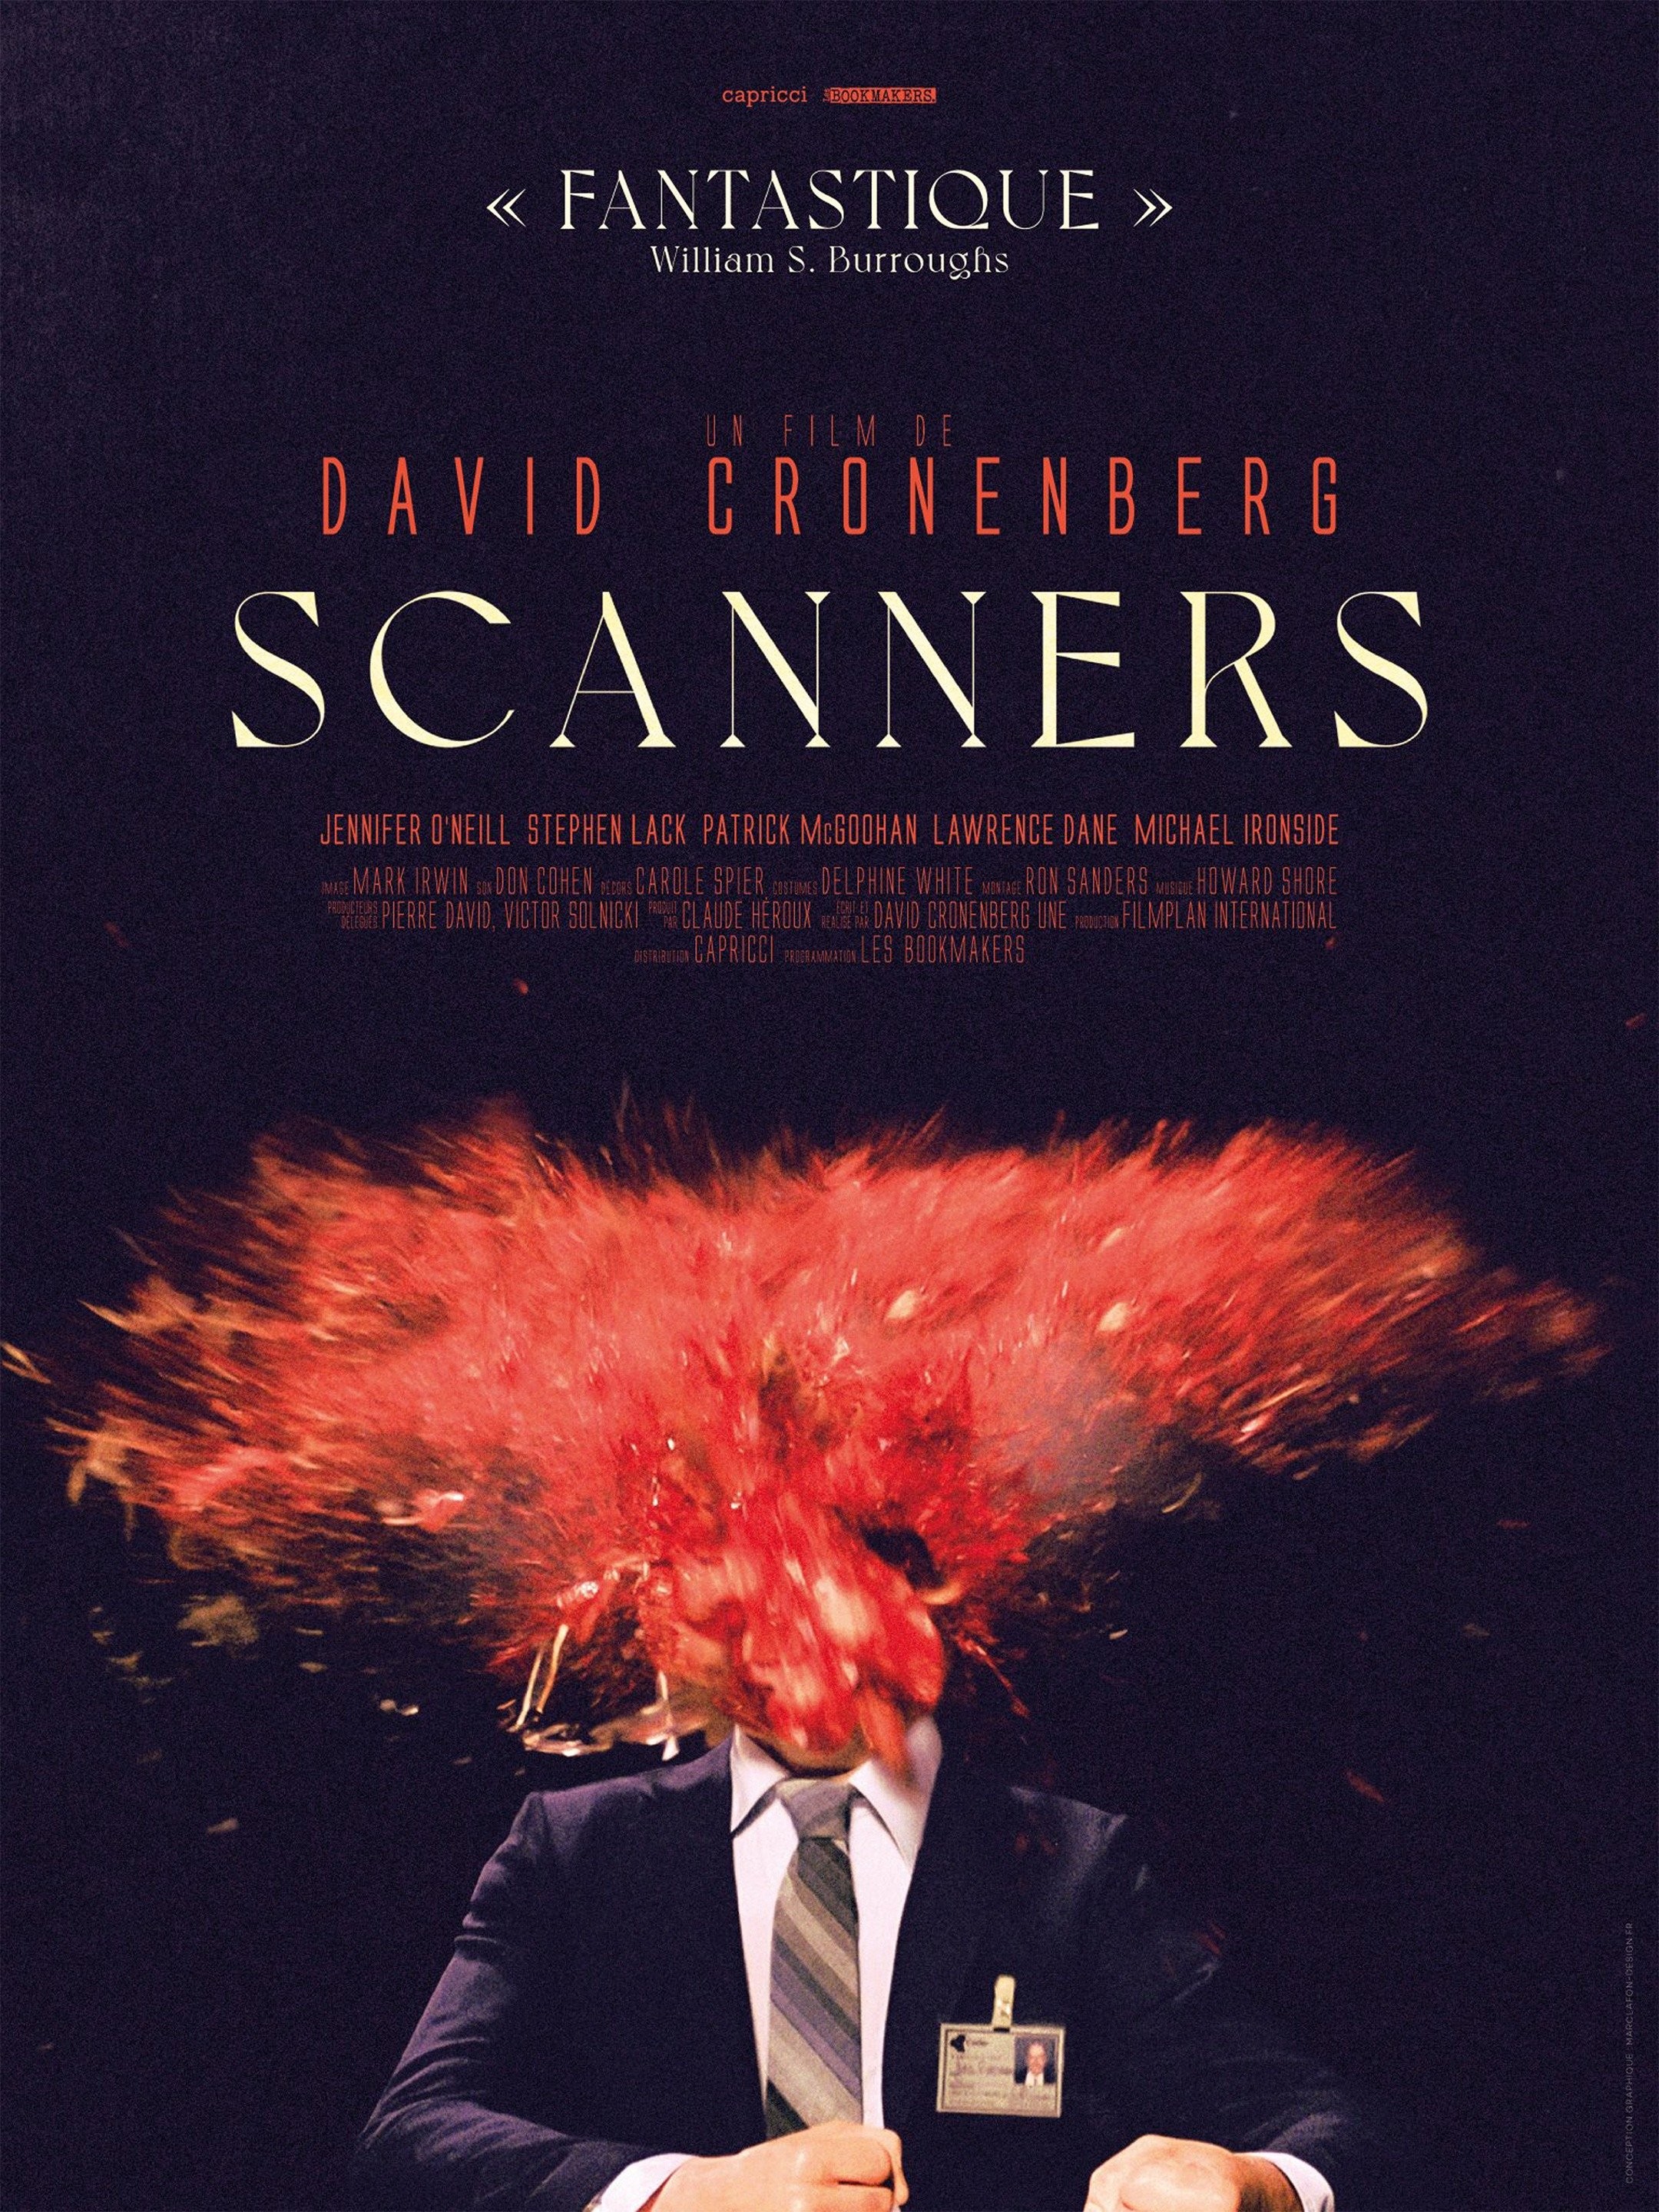 Watch Scanners